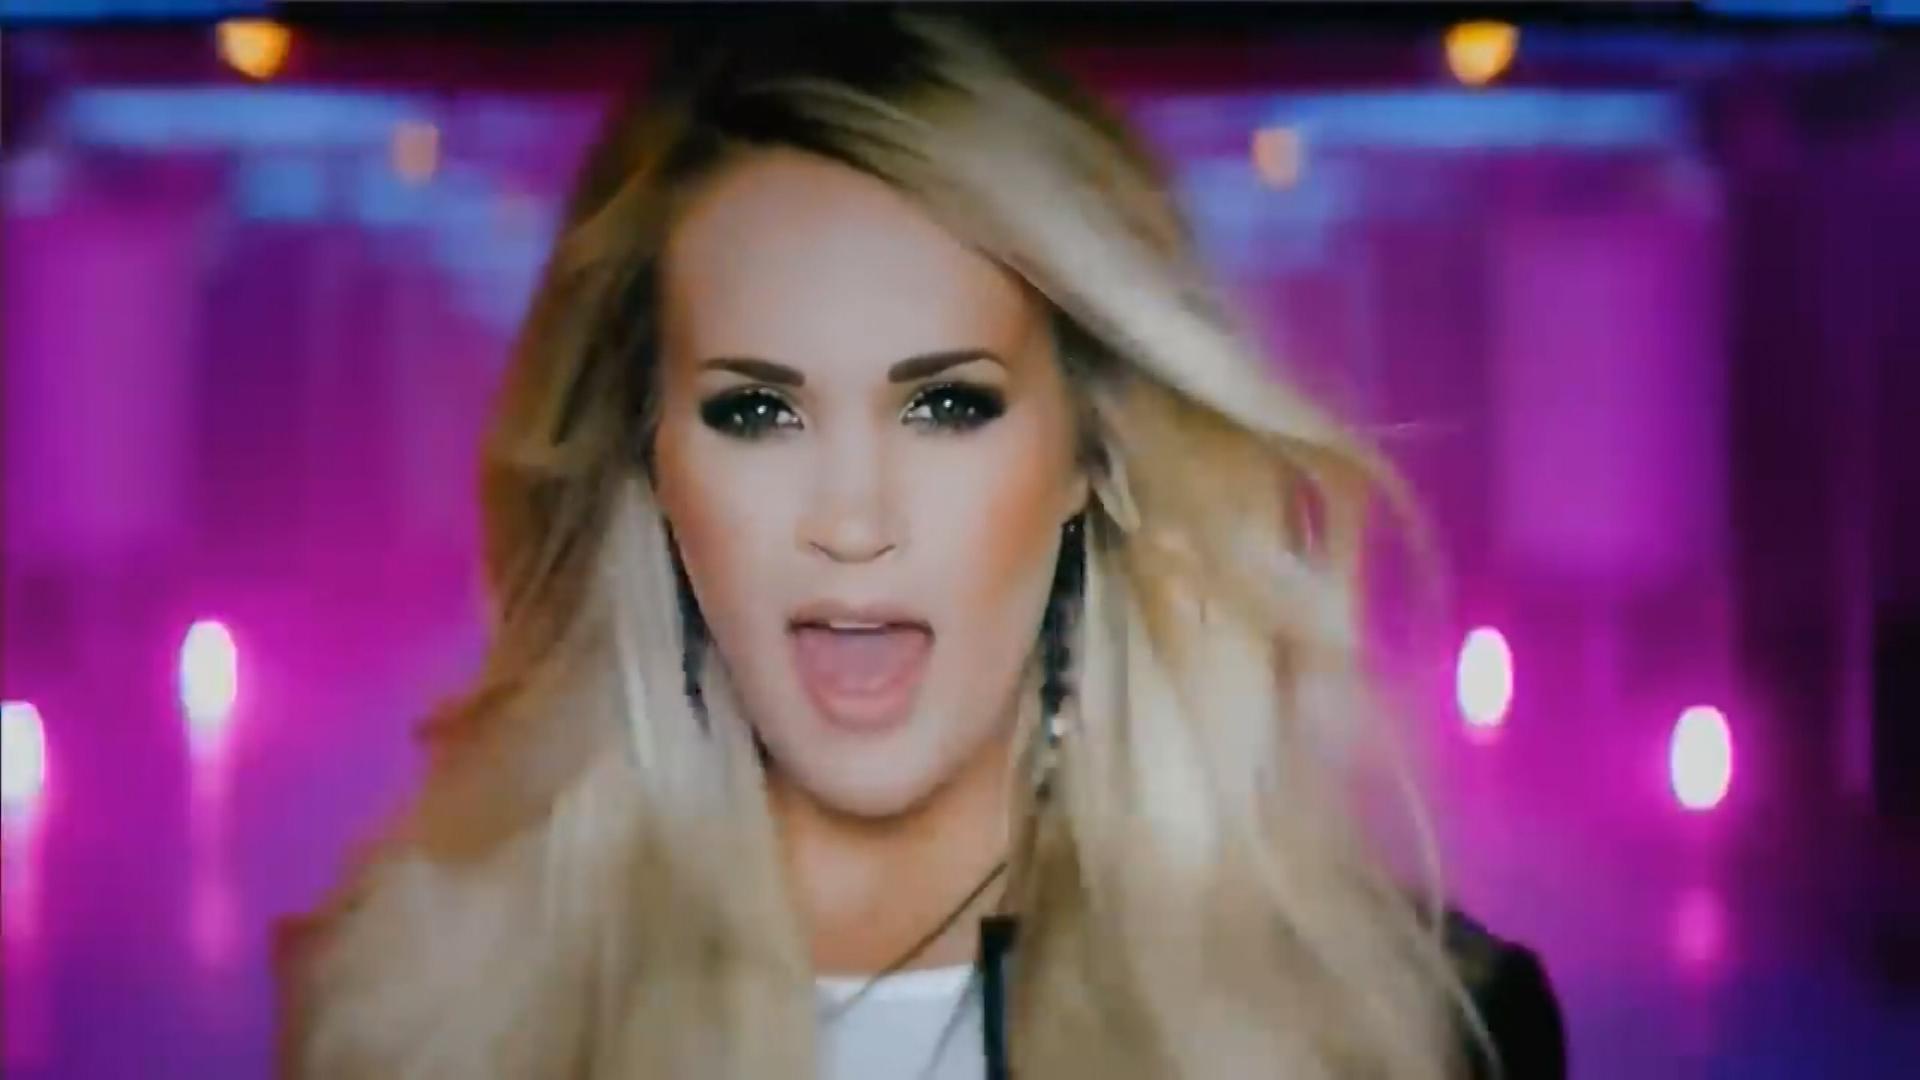 Singer accuses Carrie Underwood of stealing song